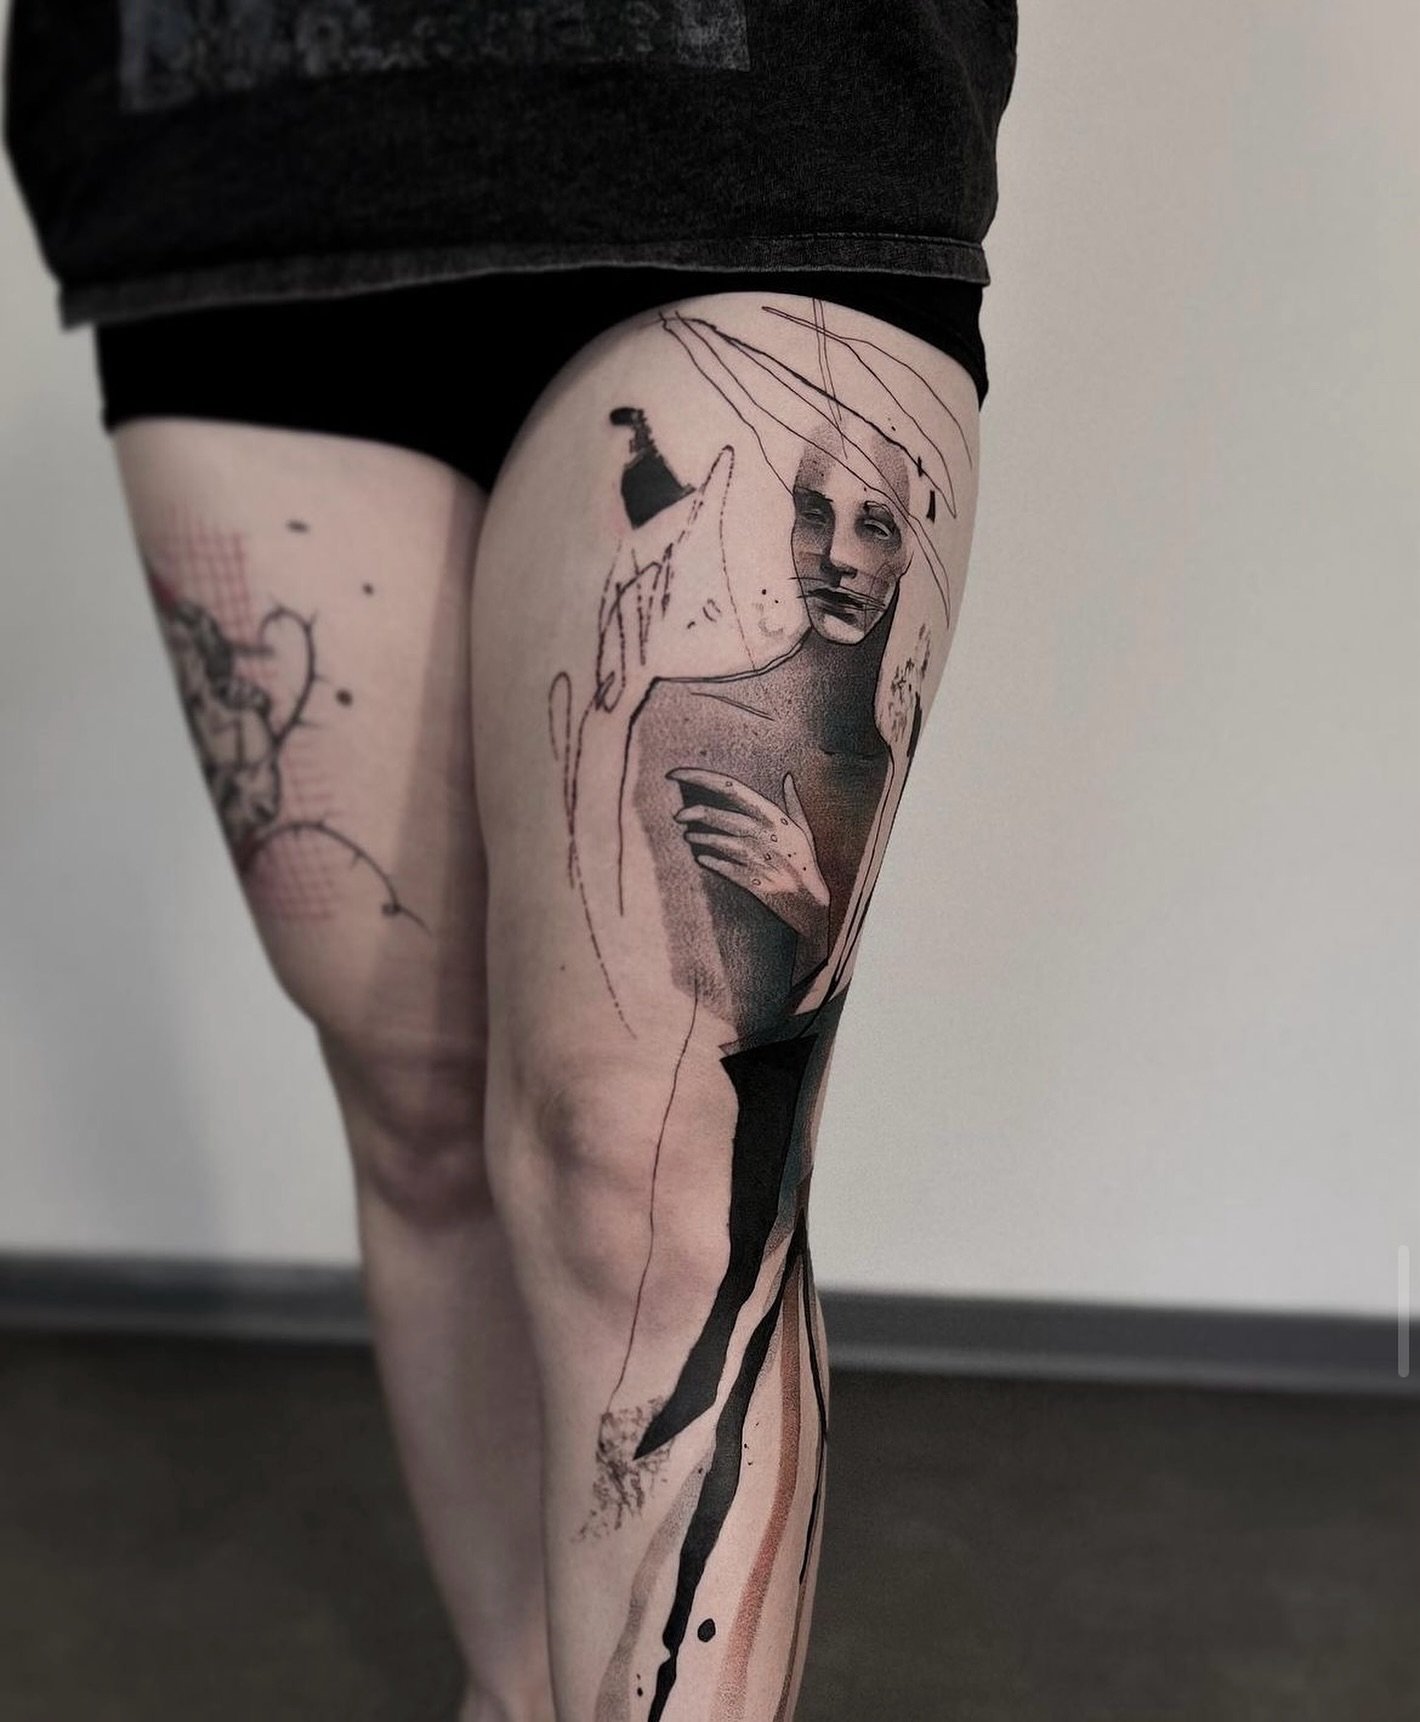 by @nika_hol_ 🖤
resident artist
⠀⠀⠀⠀⠀
⠀⠀⠀⠀⠀⠀⠀⠀⠀⠀⠀⠀
for bookings, please send your request to 💌
holuskovav@seznam.cz &bull;⠀⠀⠀
⠀⠀⠀⠀⠀⠀⠀⠀ ⠀⠀⠀⠀⠀⠀⠀⠀⠀⠀⠀ 

#freehand #abstracttattoos #no&iuml;aberlin #noiiaberlin #artist #abstractart #besttattooartists #a